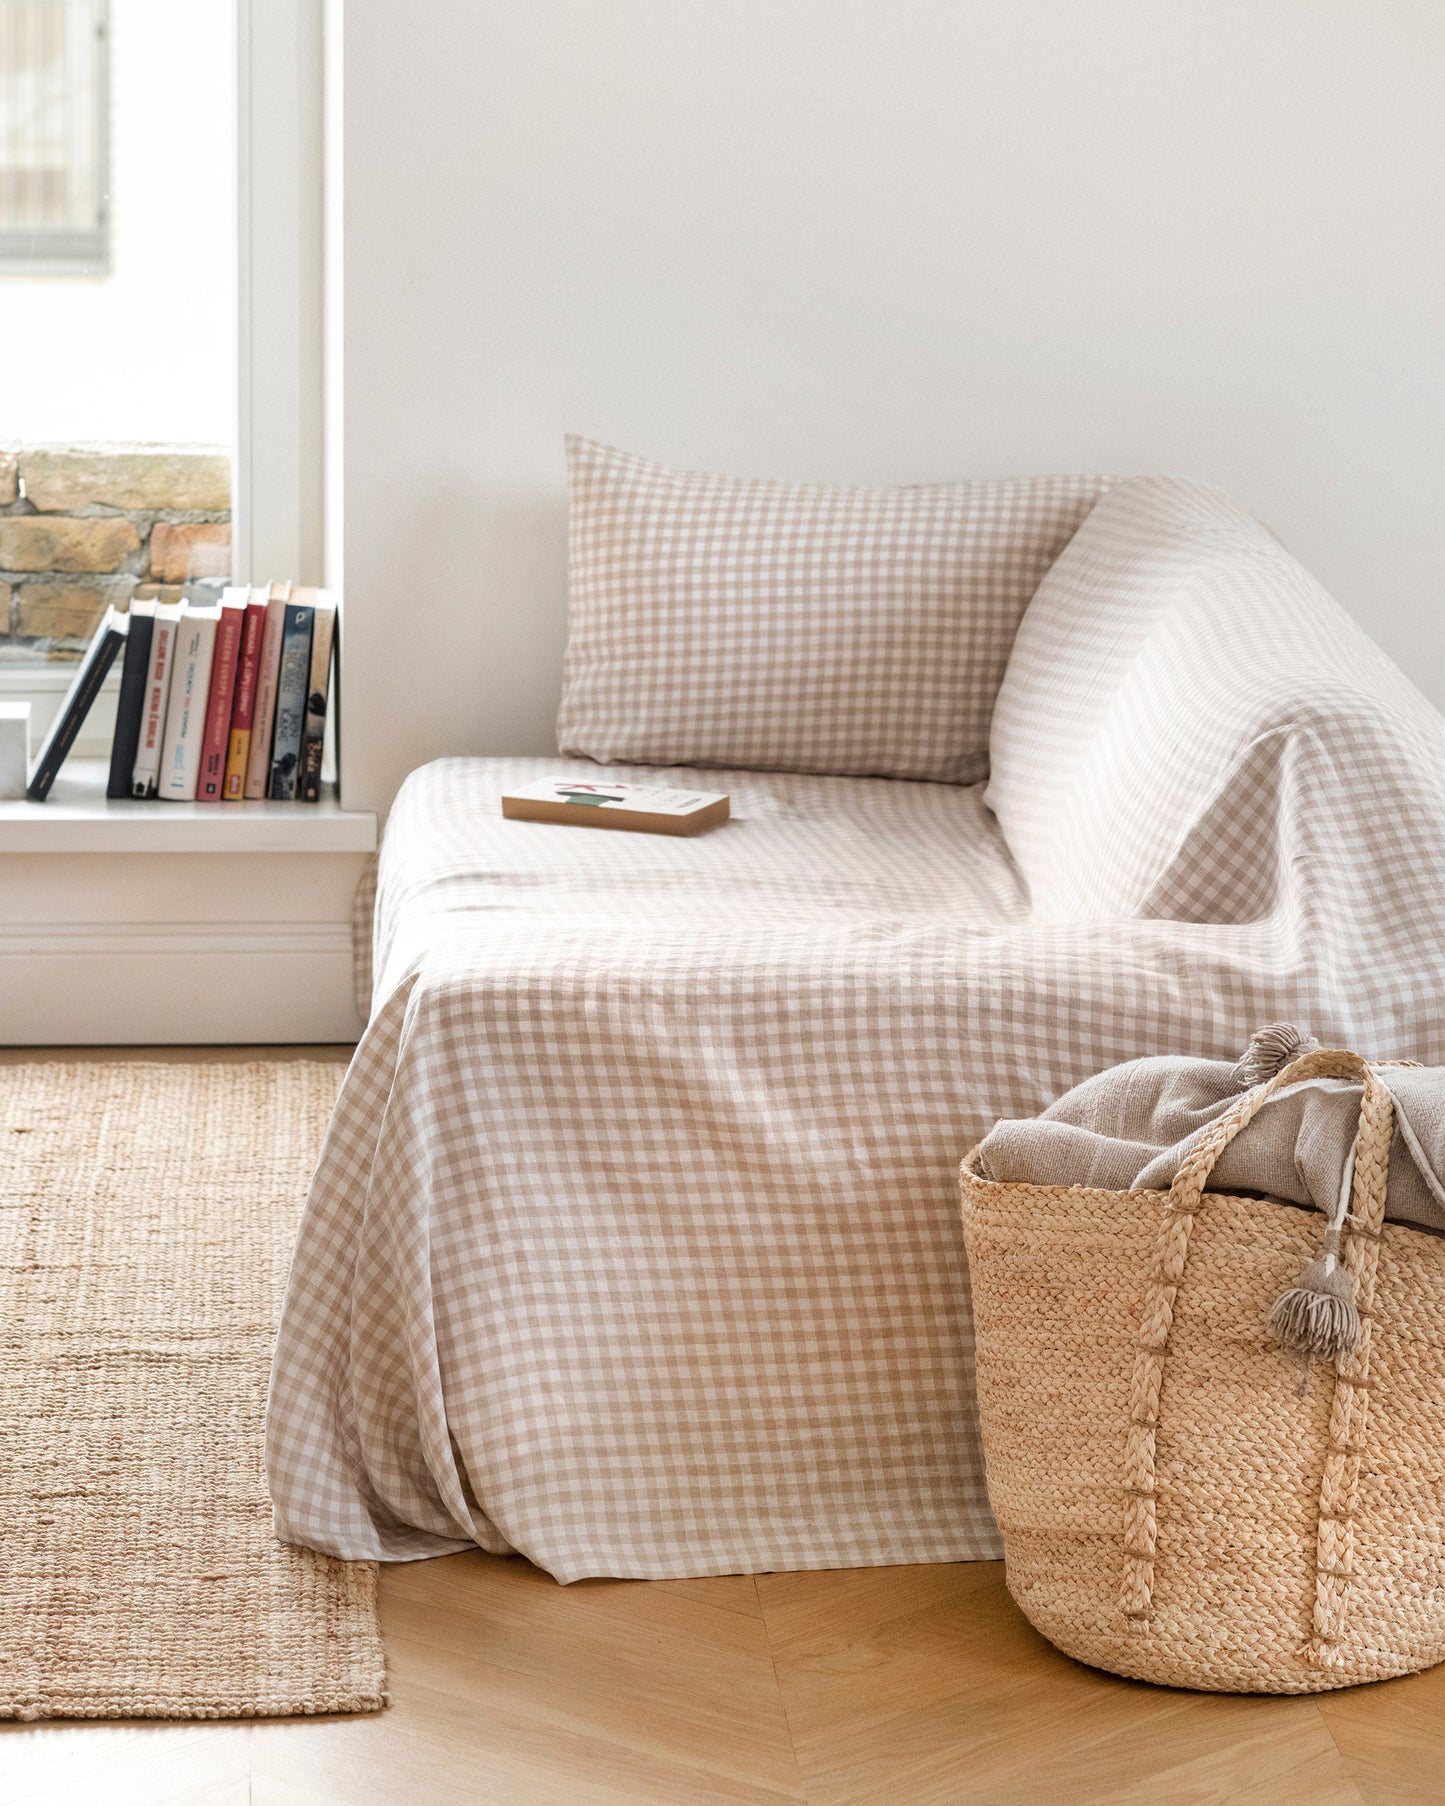 Linen couch cover in Natural gingham - MagicLinen